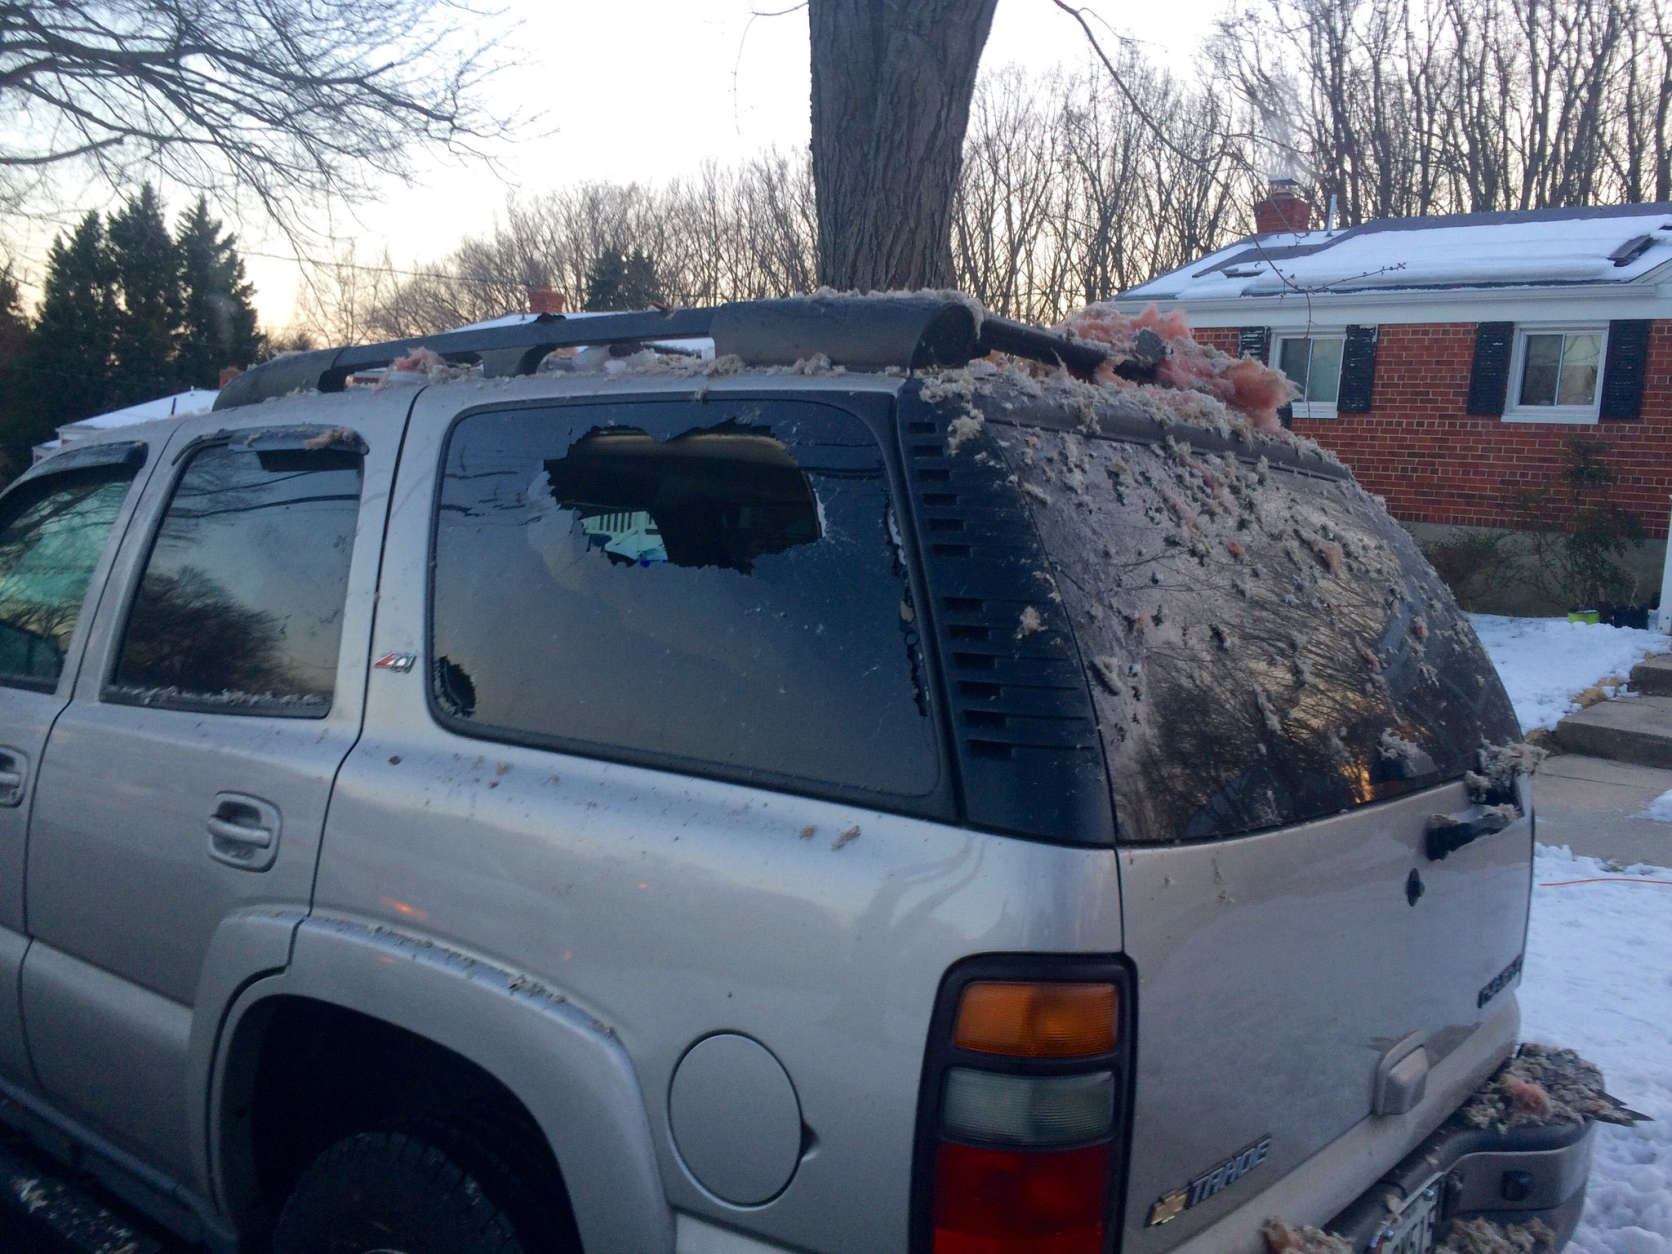 An SUV parked near the explosion was damaged, and was covered with debris Friday morning. (WTOP/Nick Iannelli)